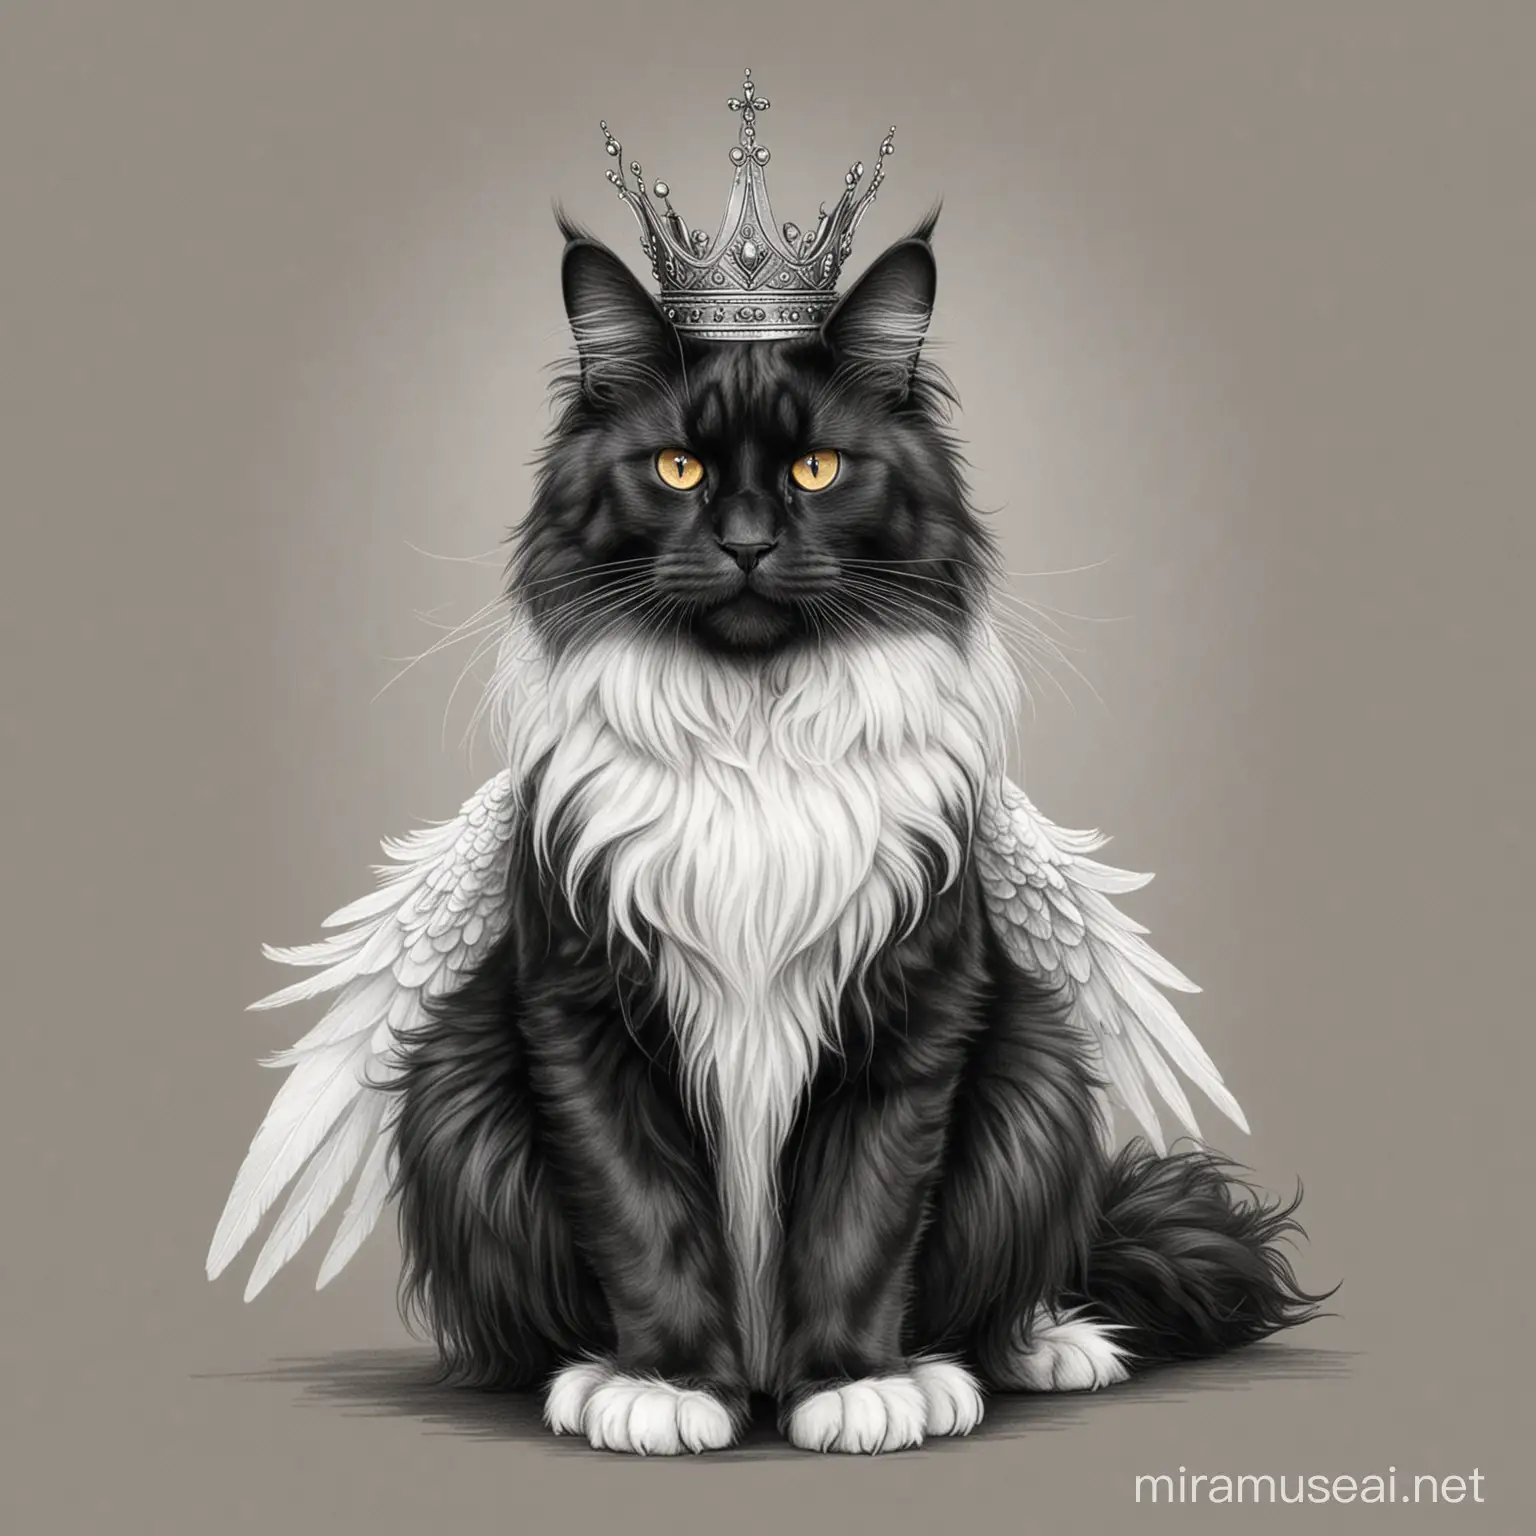 Majestic Black Maine Coon Cat with White Wings and Regal Crown